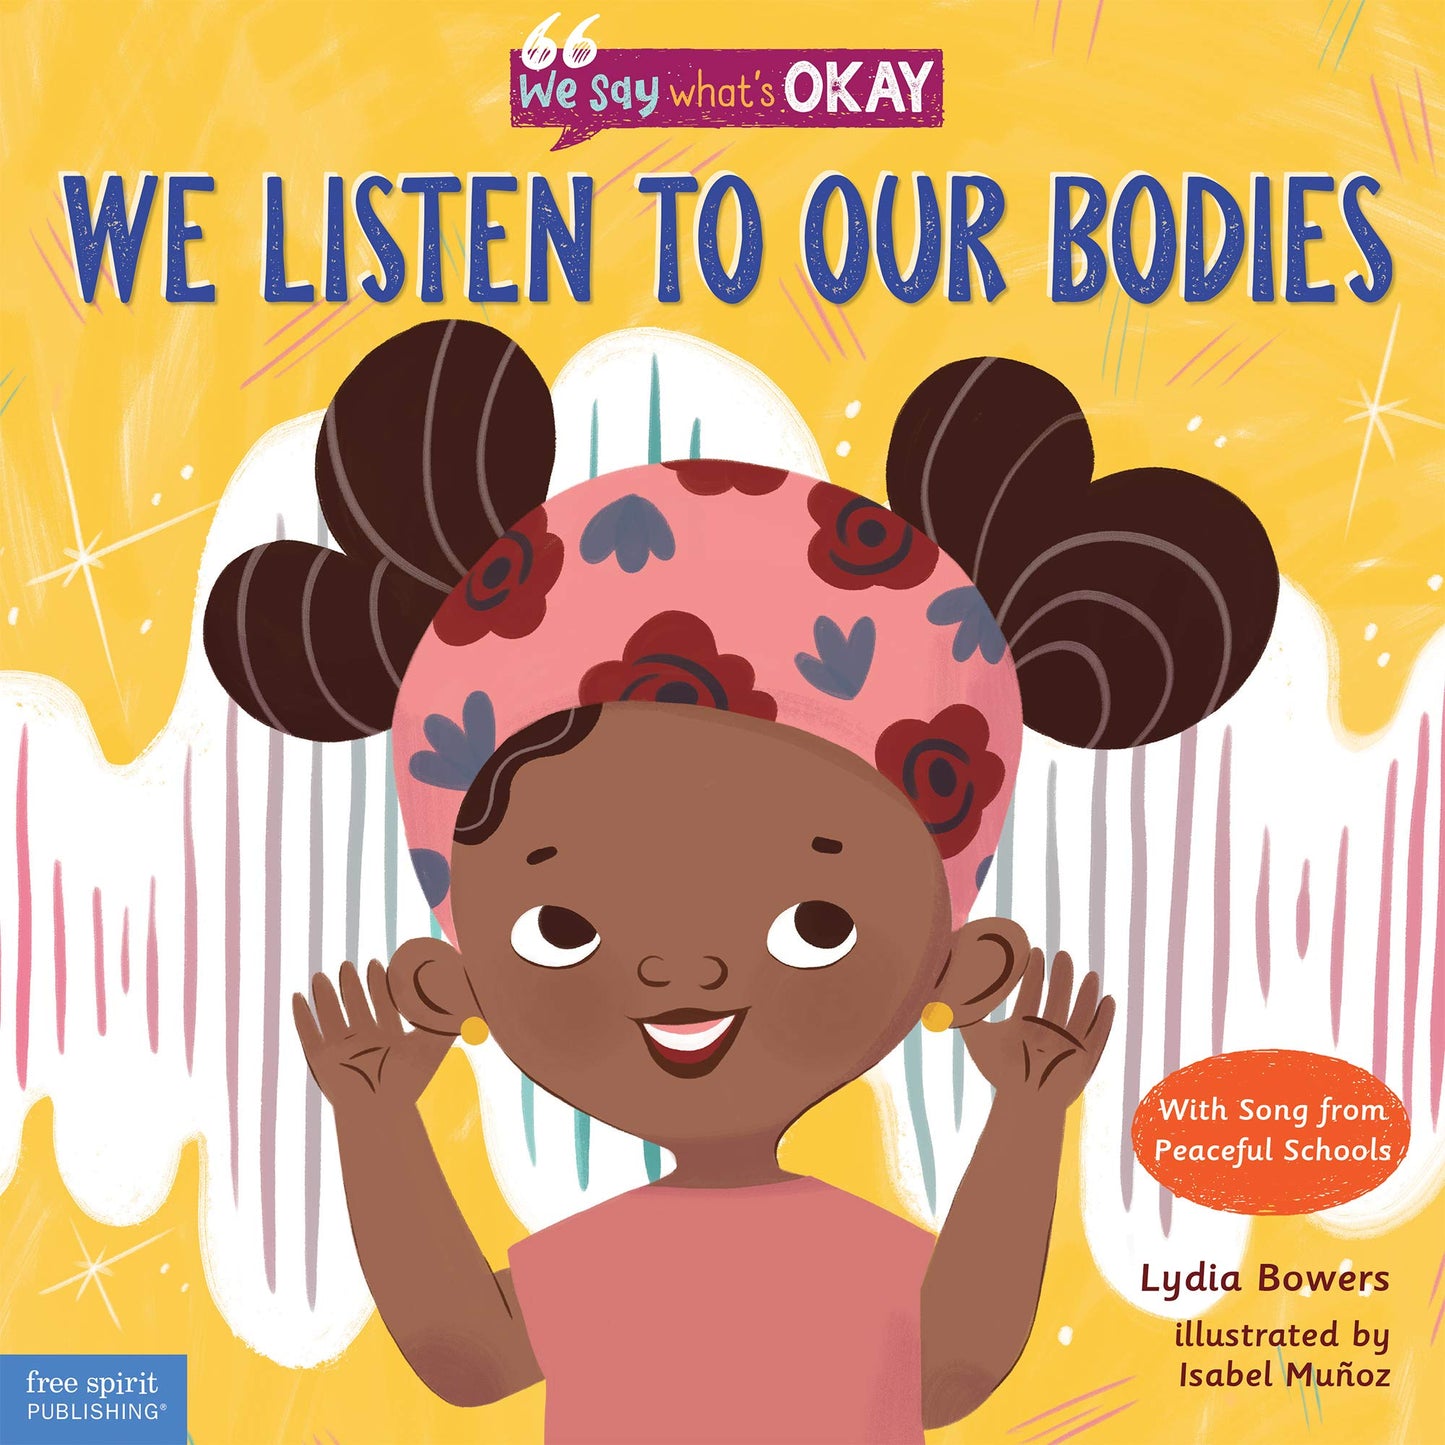 We Listen to Our Bodies // (We Say What's Okay)